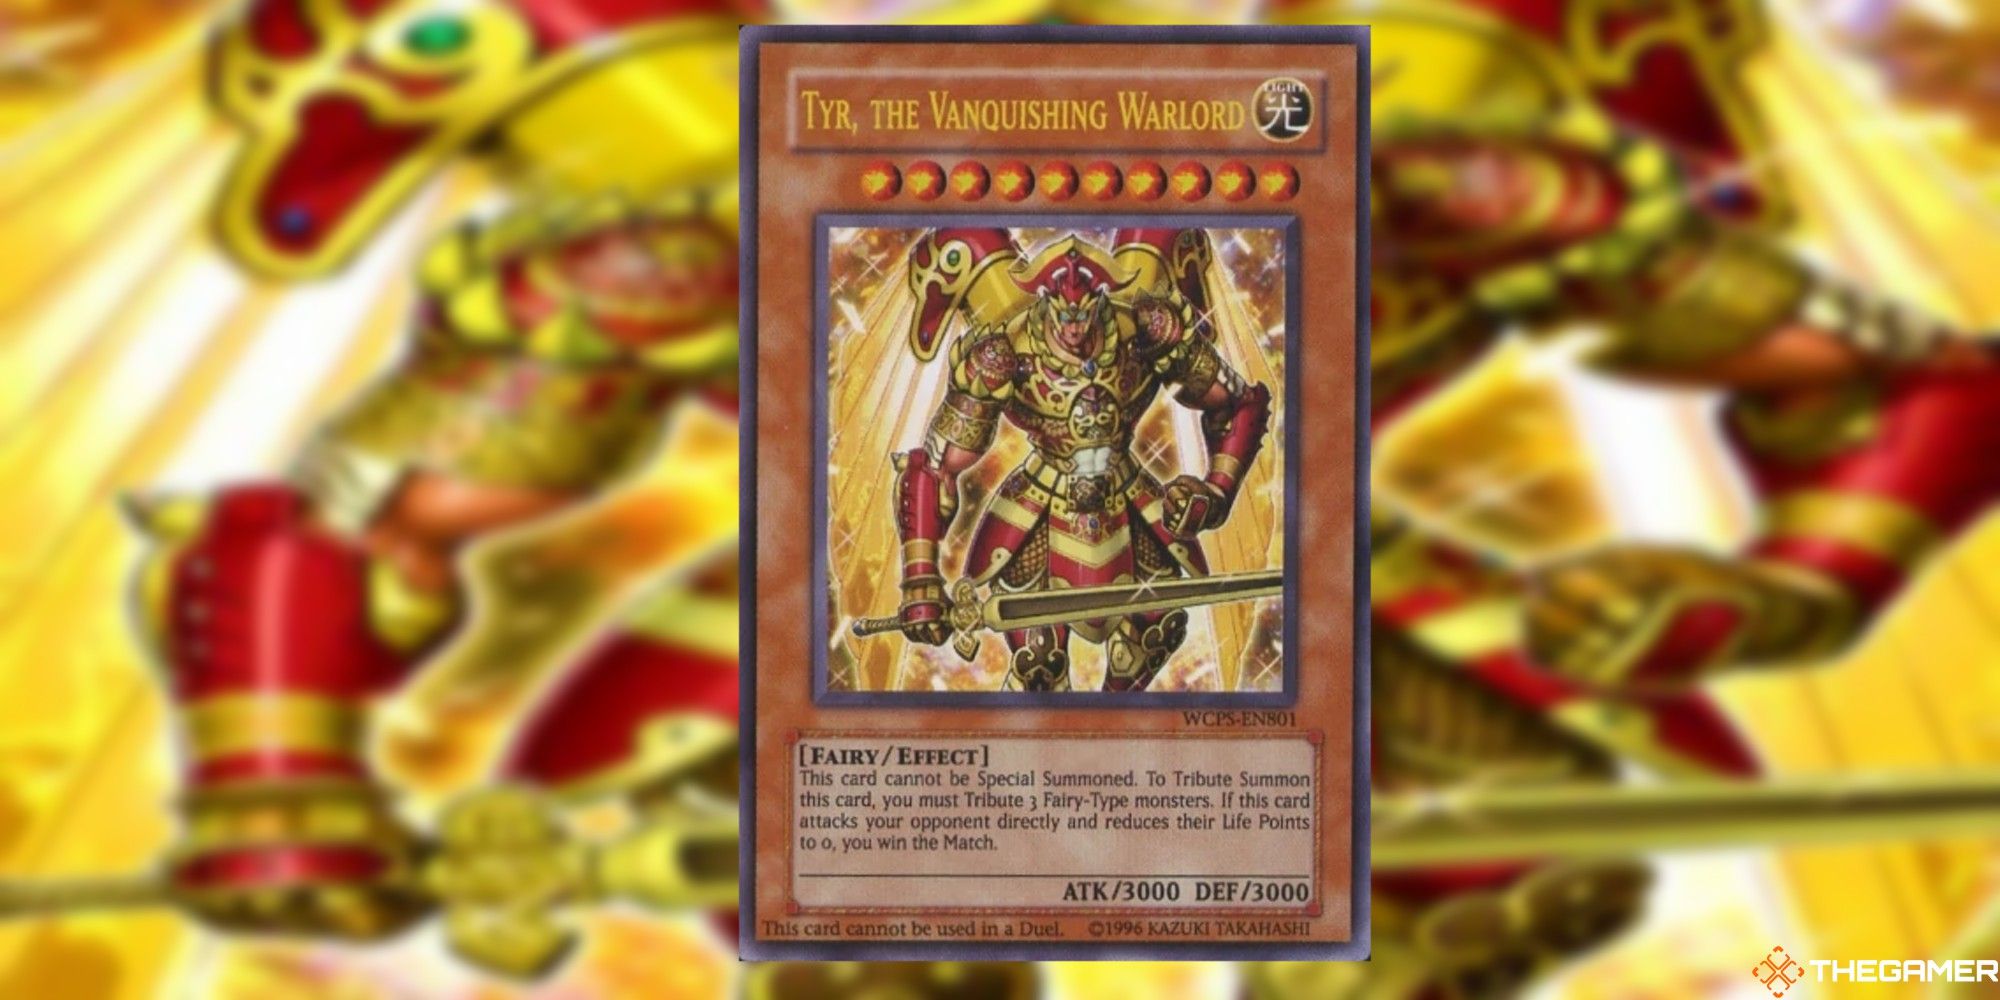 tyr, the vanquishing warlord card and art background